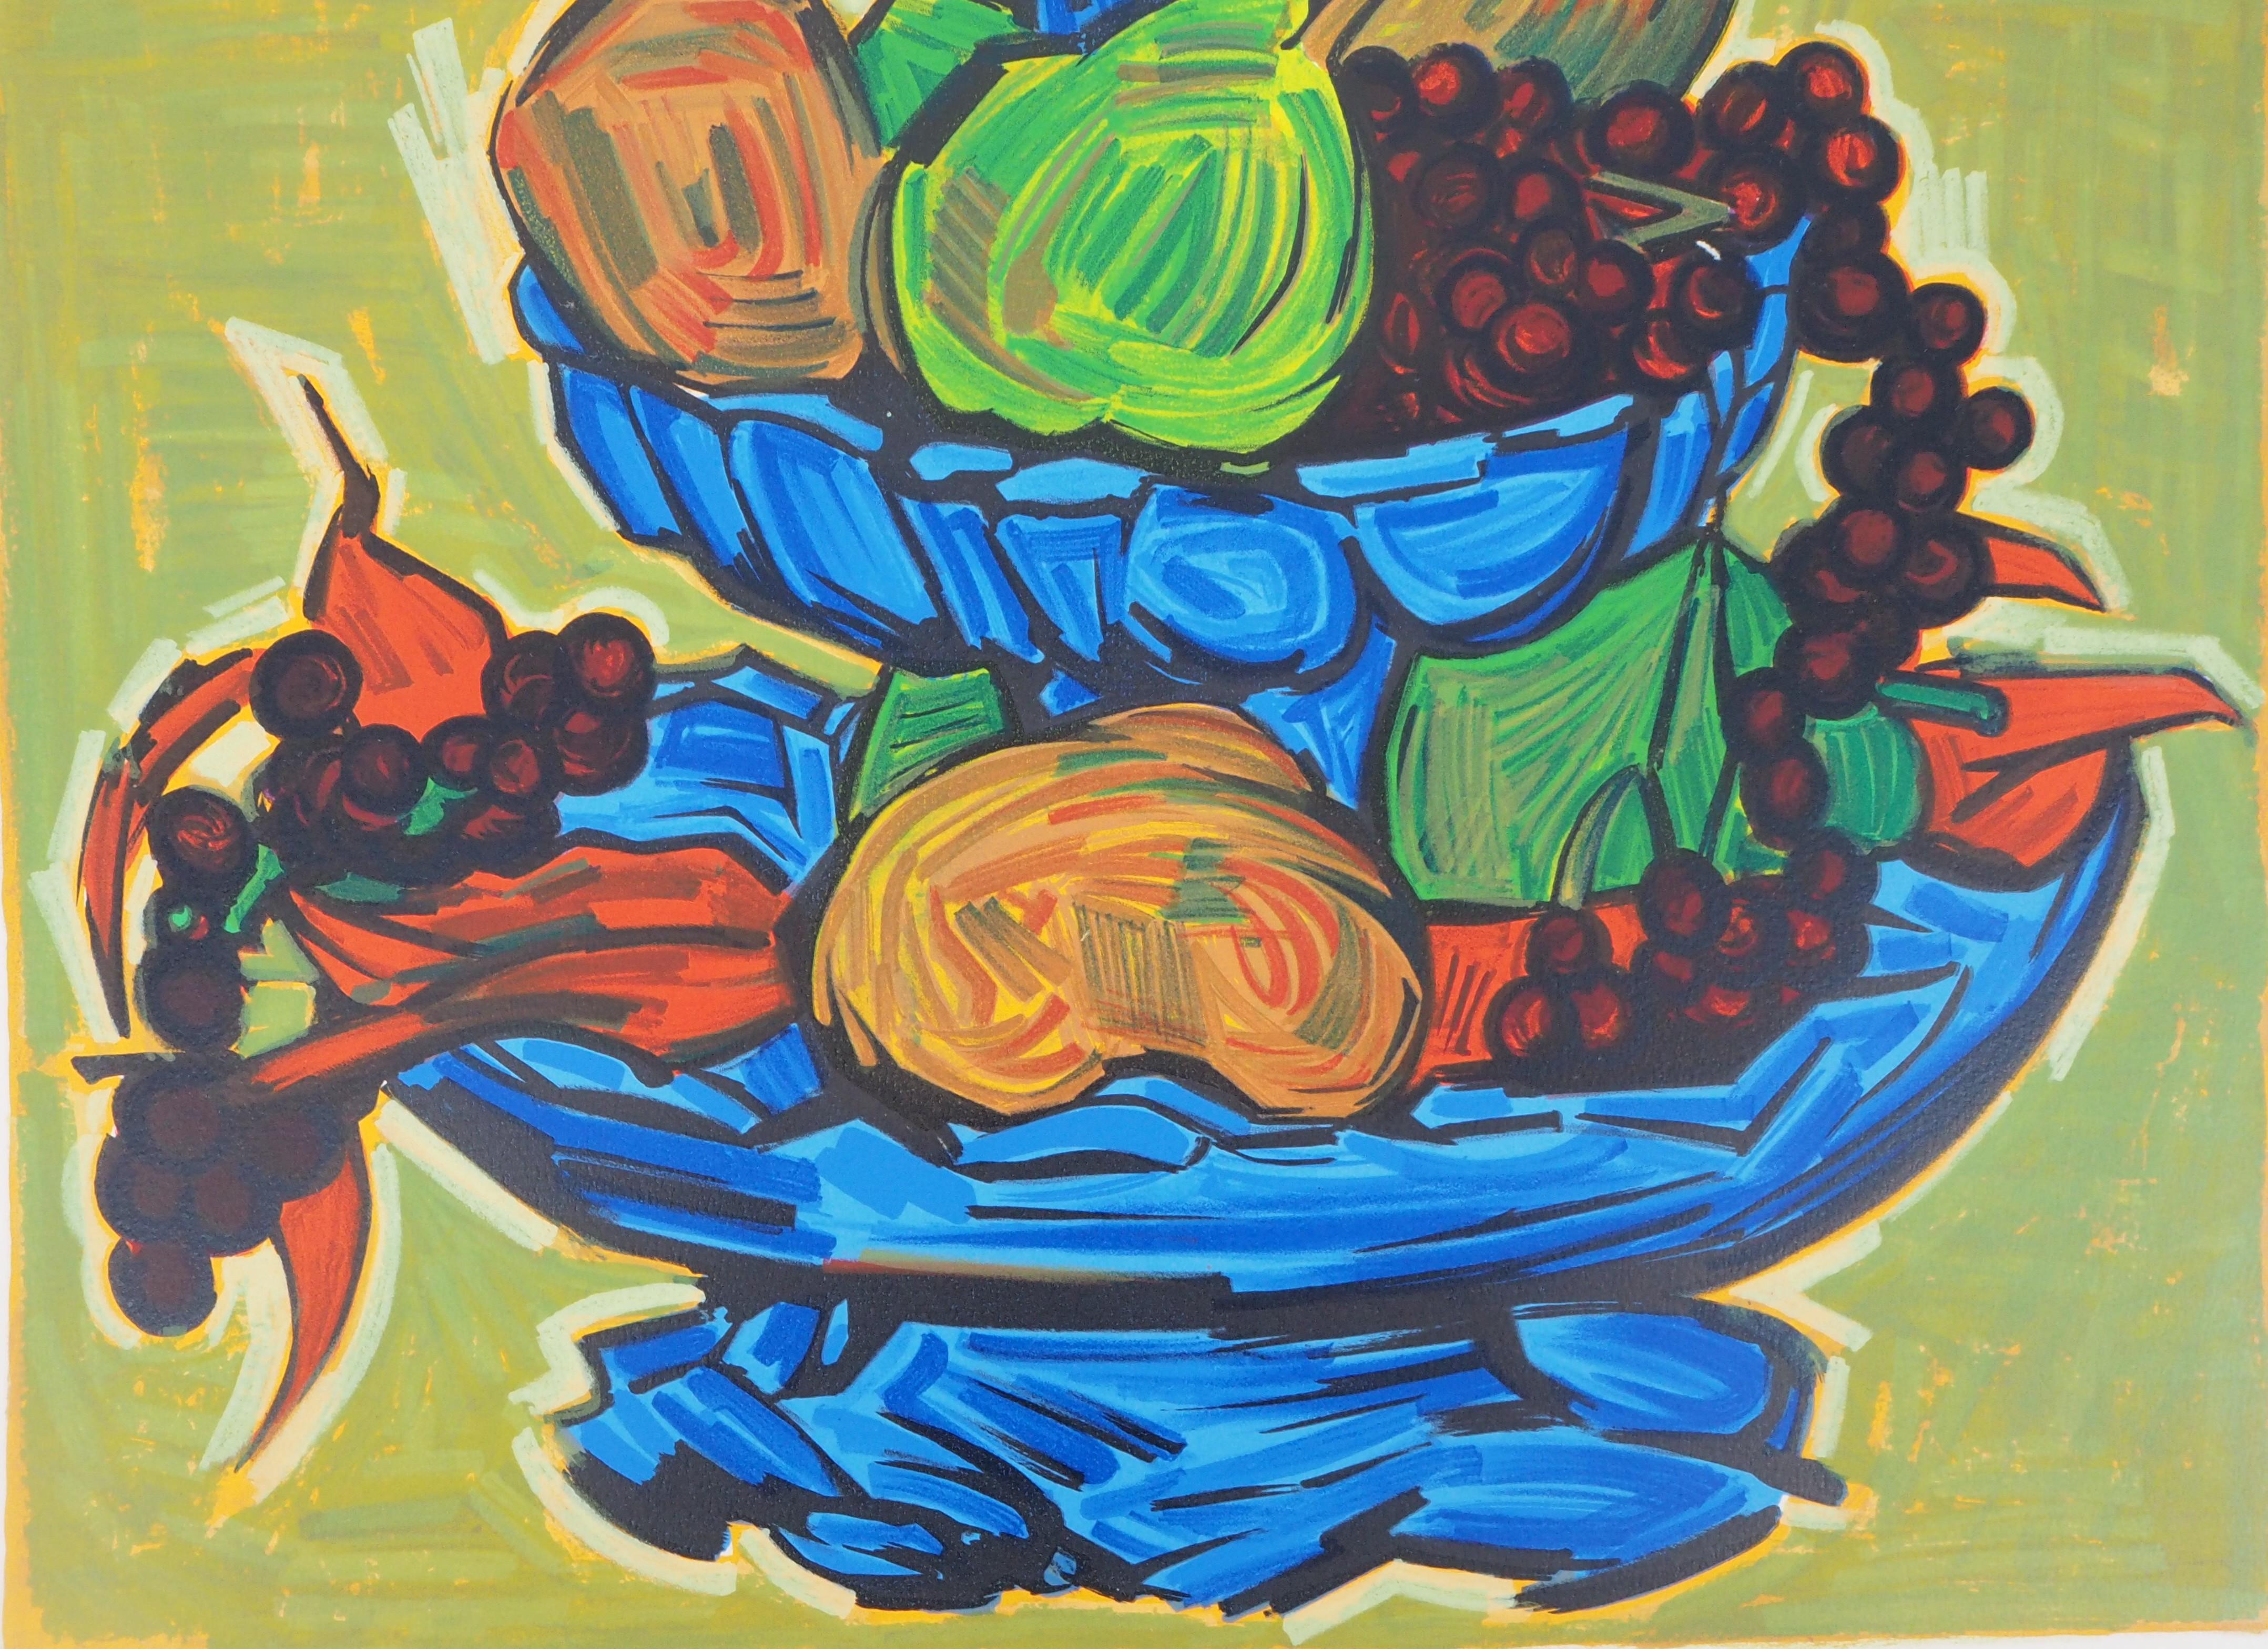 Still Life with Fruits - Original Lithograph Handsigned and Numbered (Mourlot) - Brown Still-Life Print by Isis Kischka